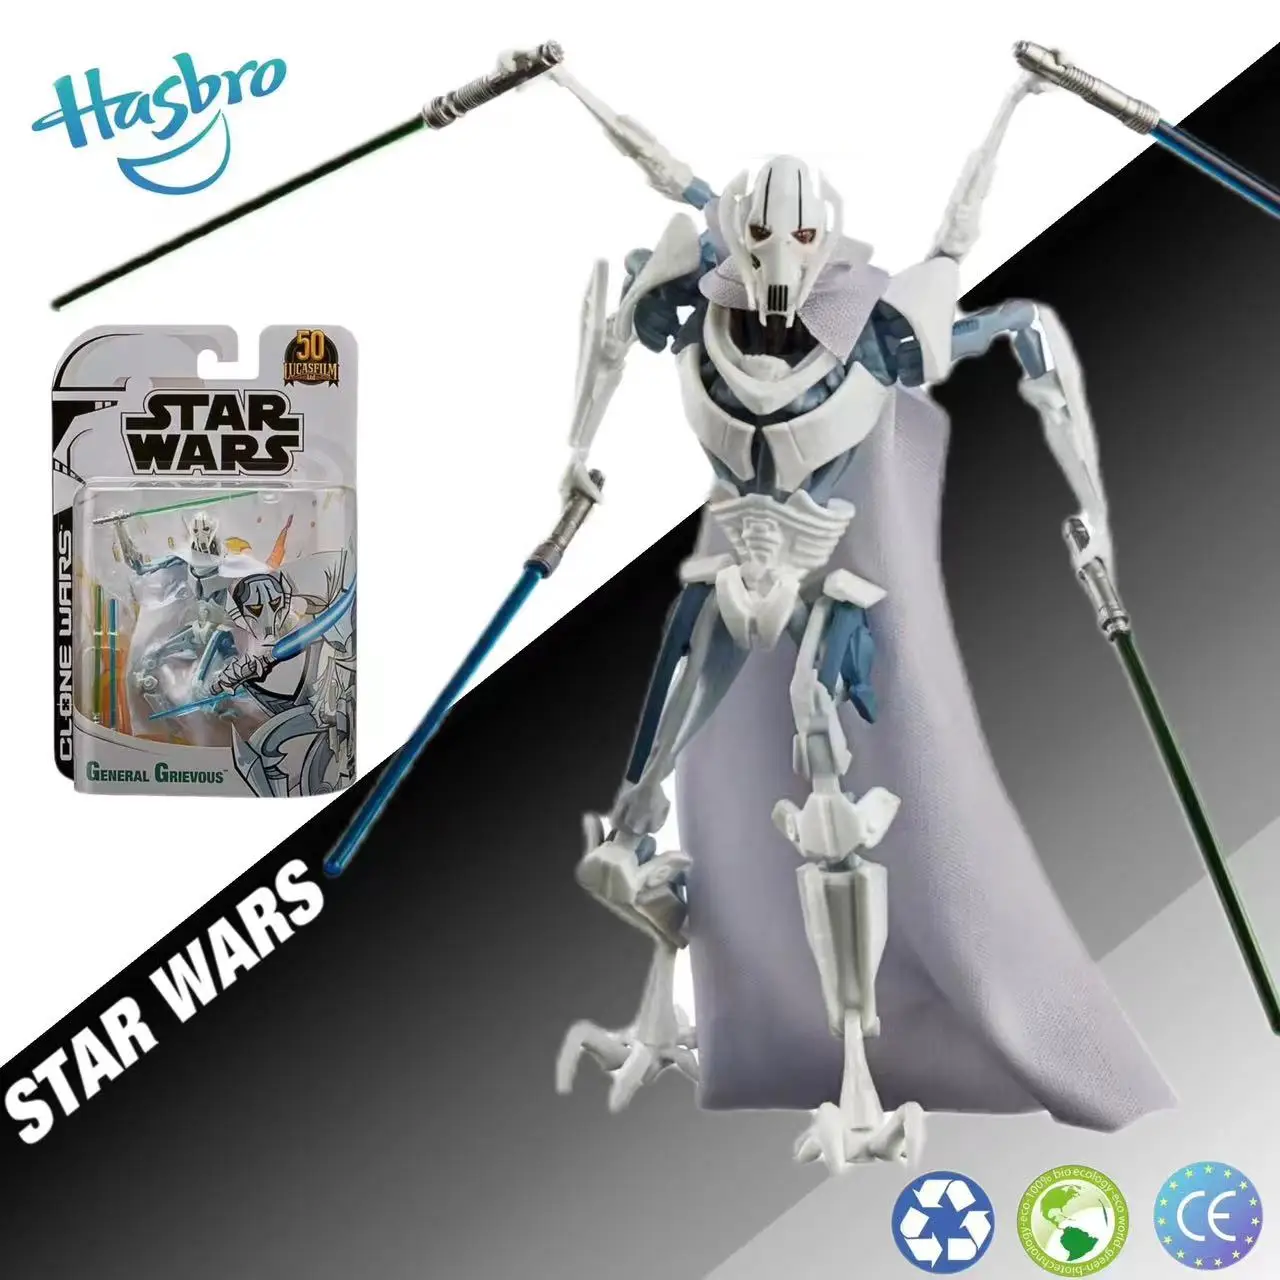 

Hasbro Star Wars The Black Series Original 6-Inch General Grievous Clone Wars Collectible Figure Toys for Children with Box